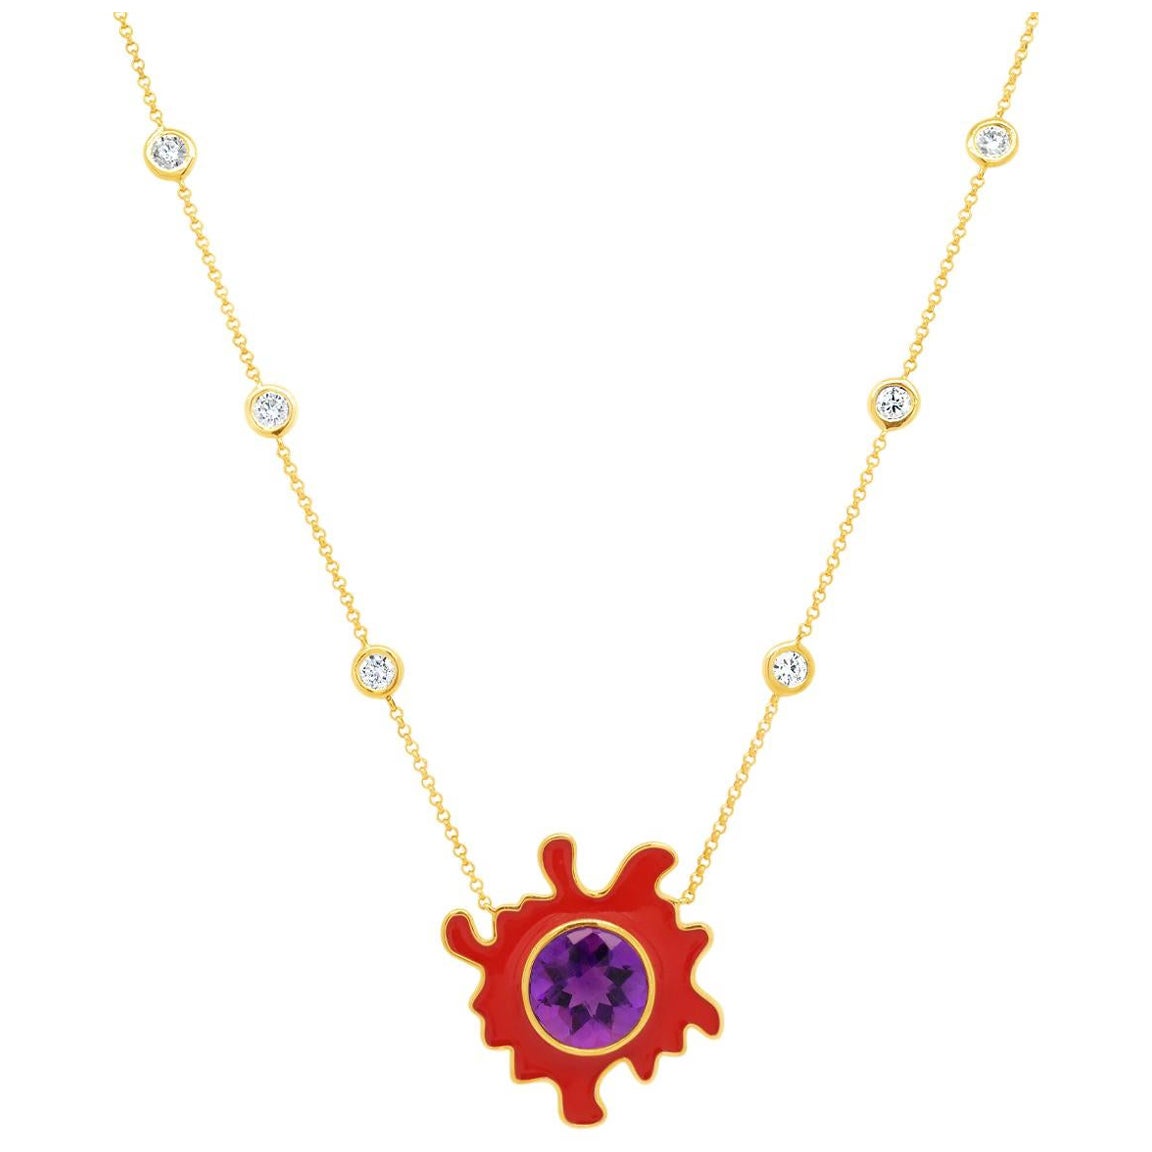 Psychedelic Solitaire Necklace 4.6GMS 3.54CTW Amethyst and Tomato Enamel